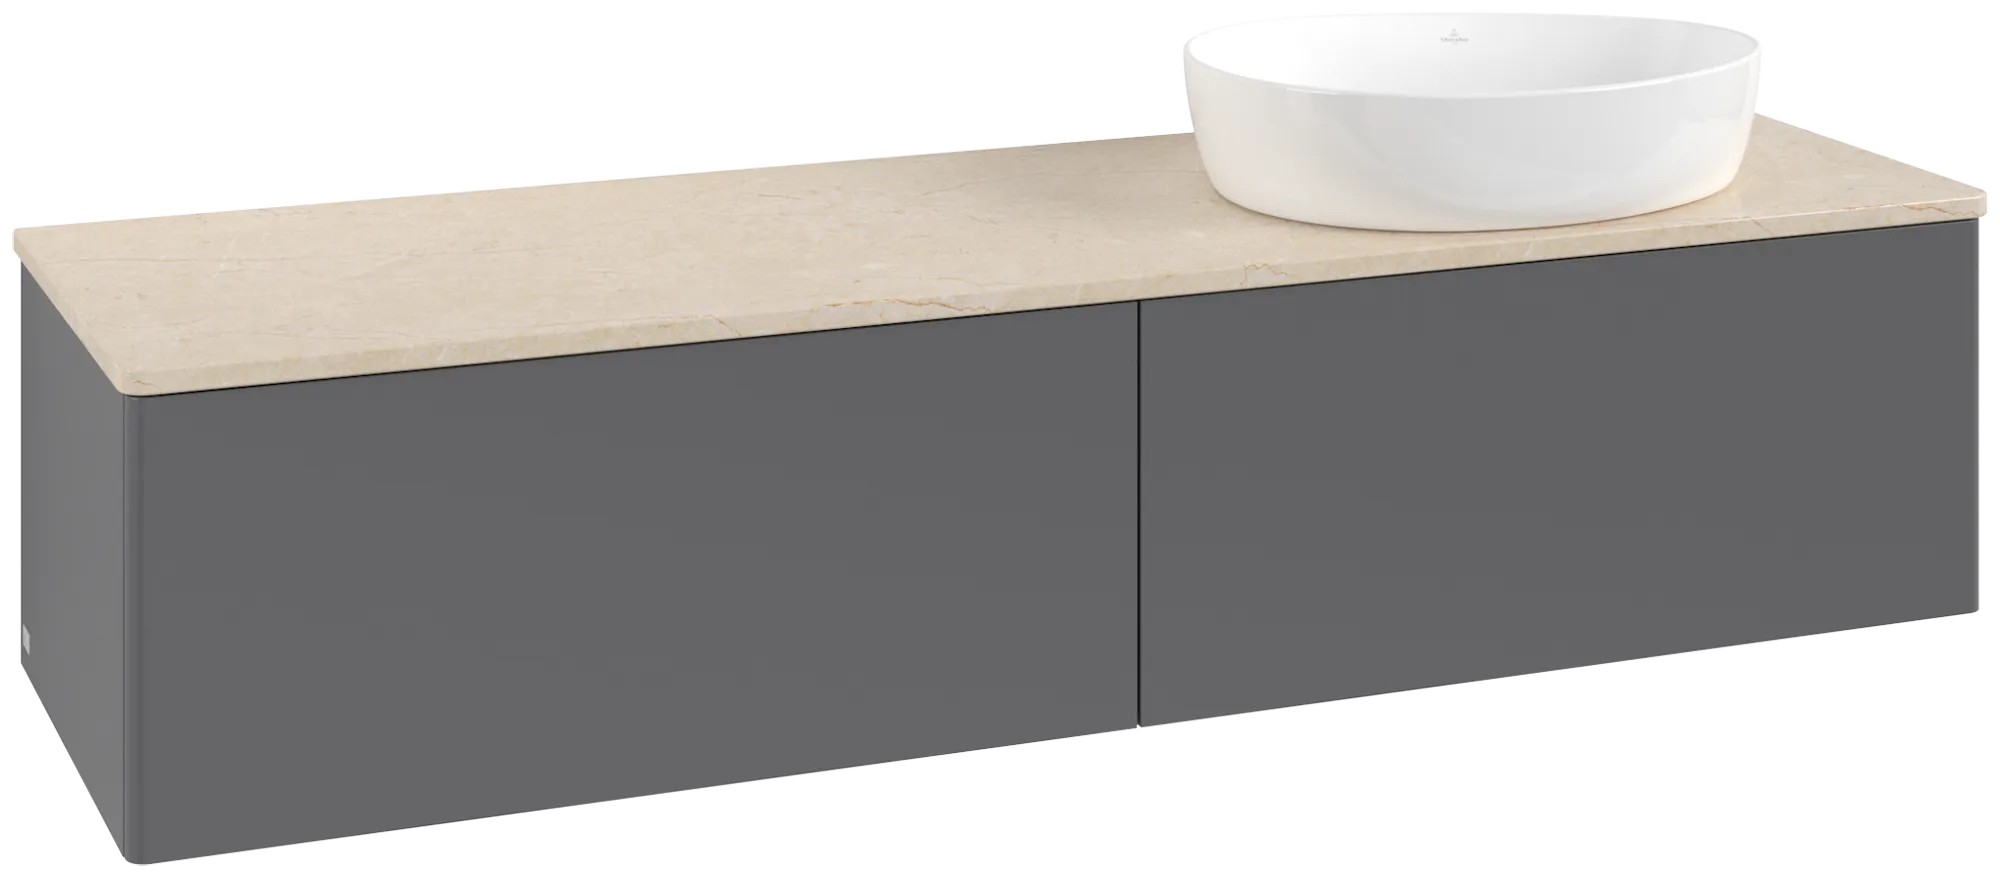 Picture of VILLEROY BOCH Antao Vanity unit, with lighting, 2 pull-out compartments, 1600 x 360 x 500 mm, Front without structure, Anthracite Matt Lacquer / Botticino #L38013GK